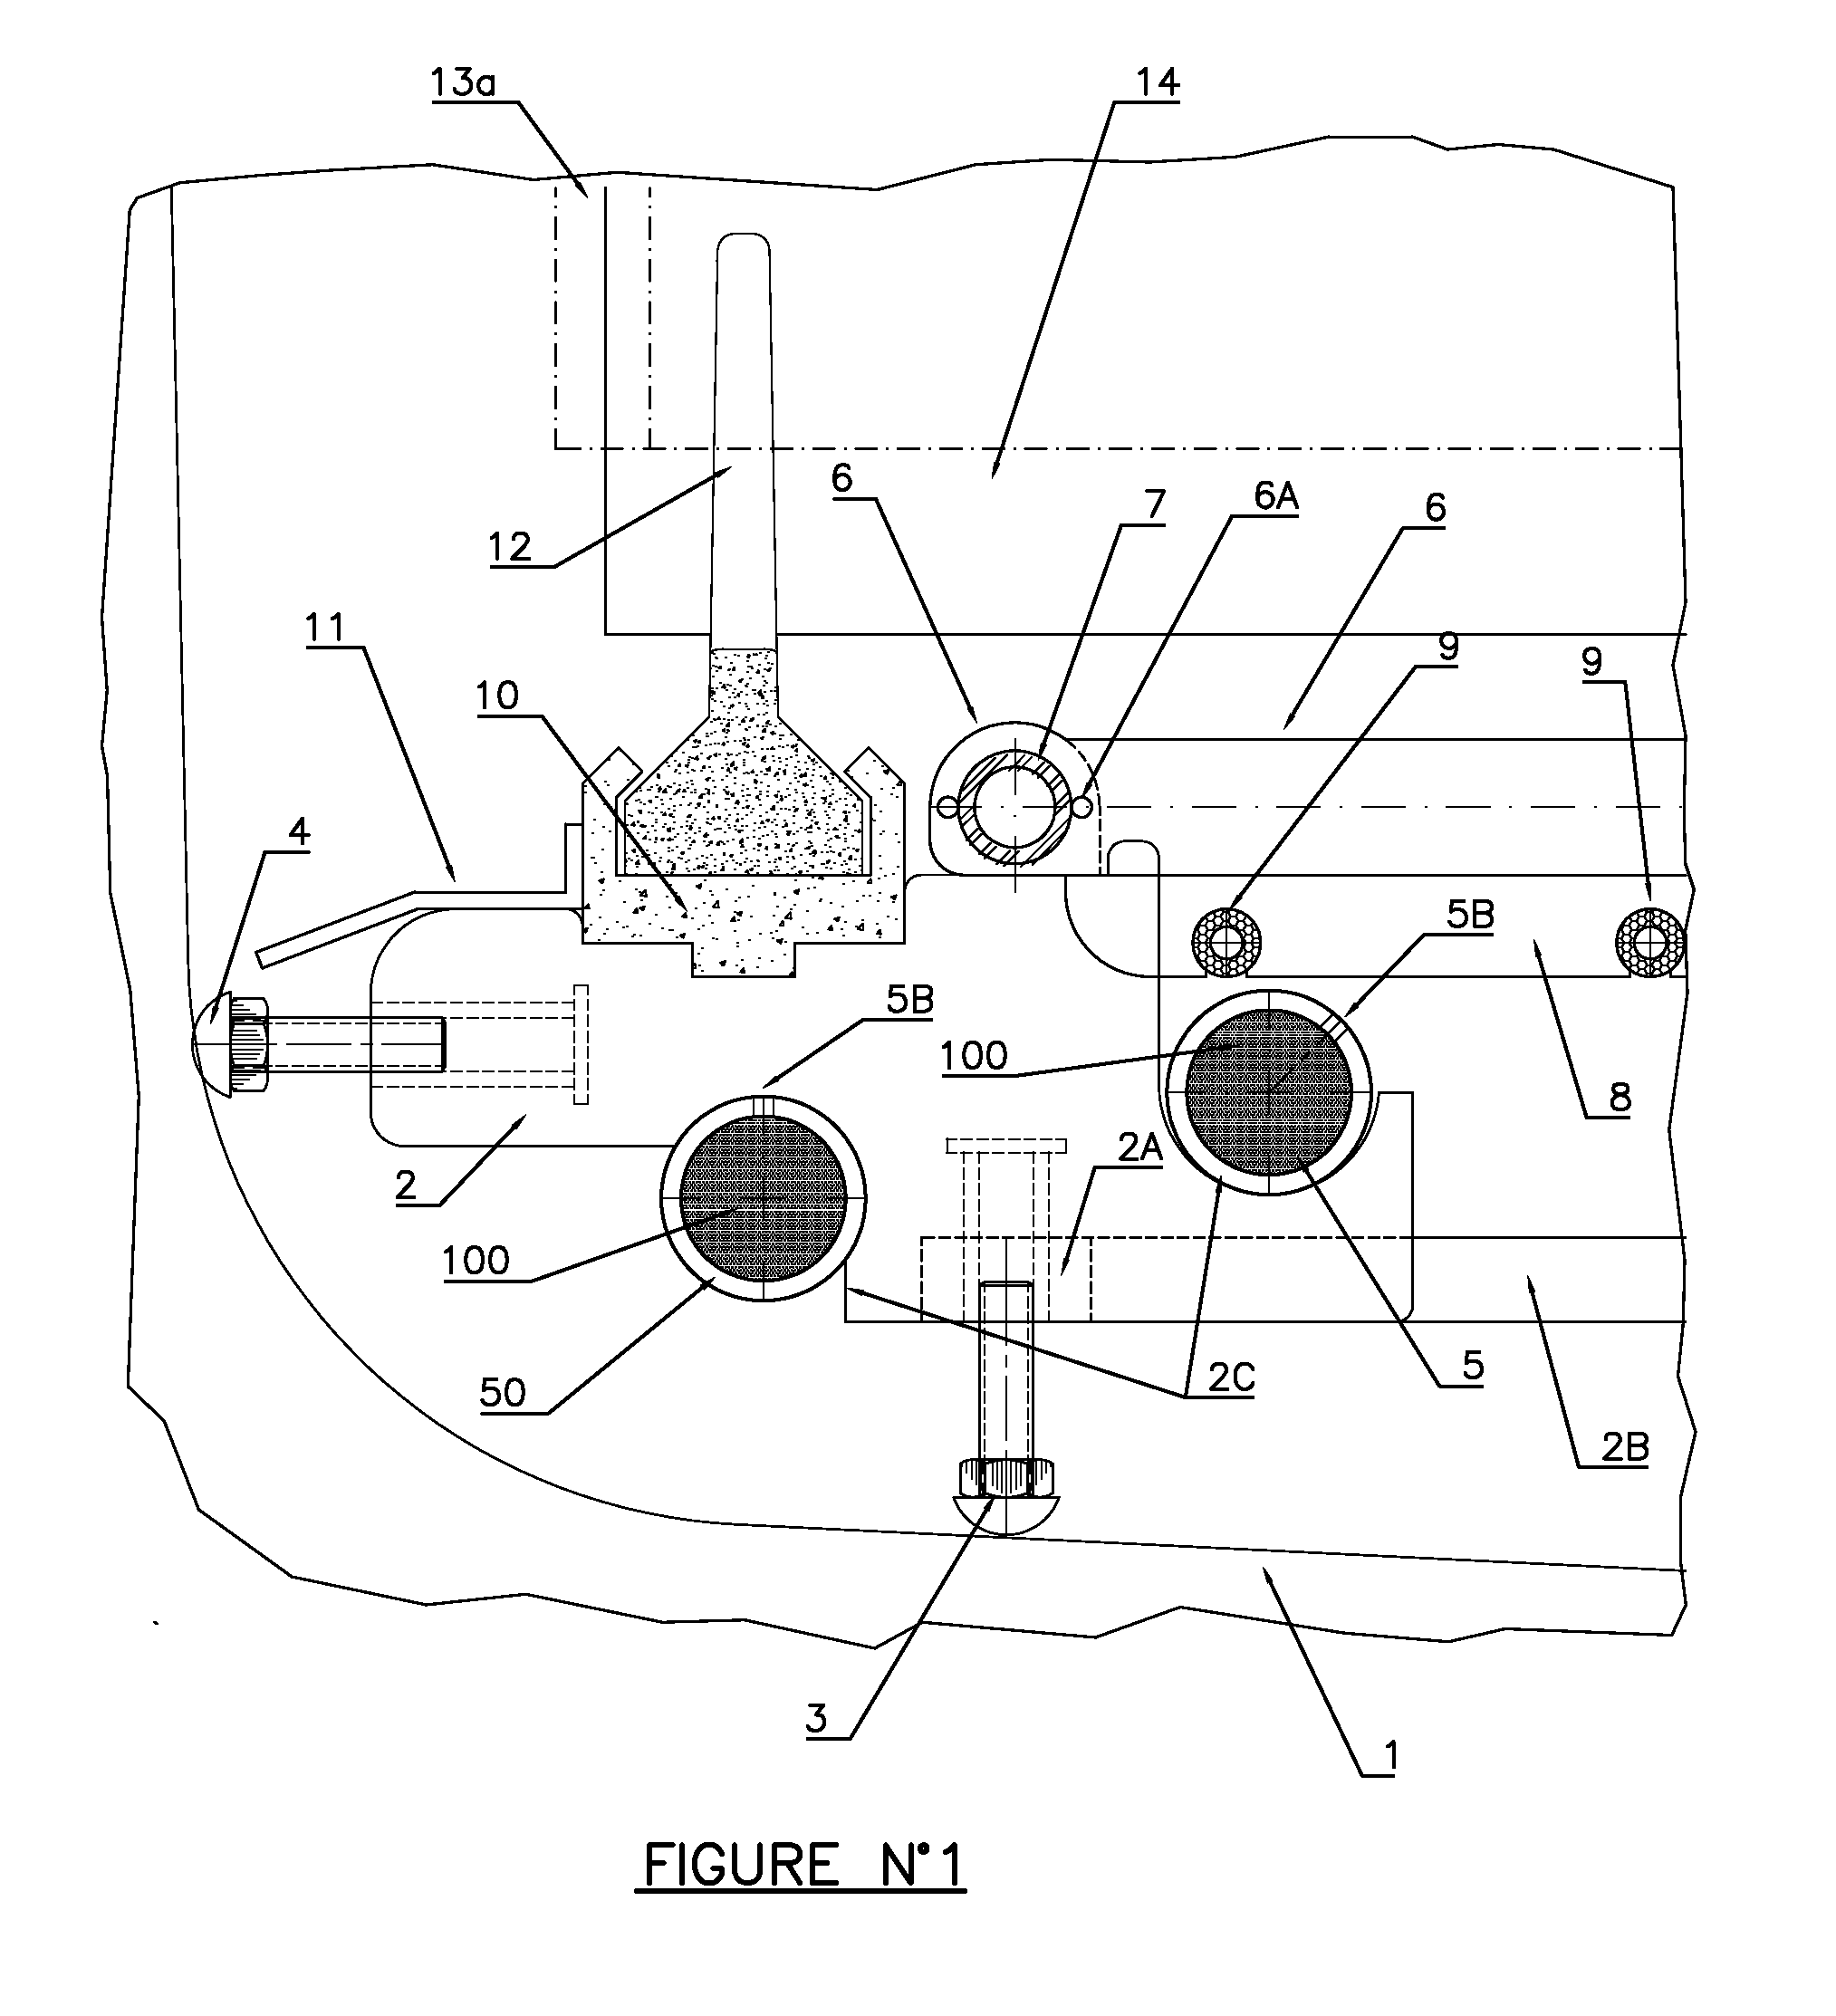 System and apparatus for enhancing convection in electrolytes to achieve improved electrodeposition of copper and other non ferrous metals in industrial electrolytic cells